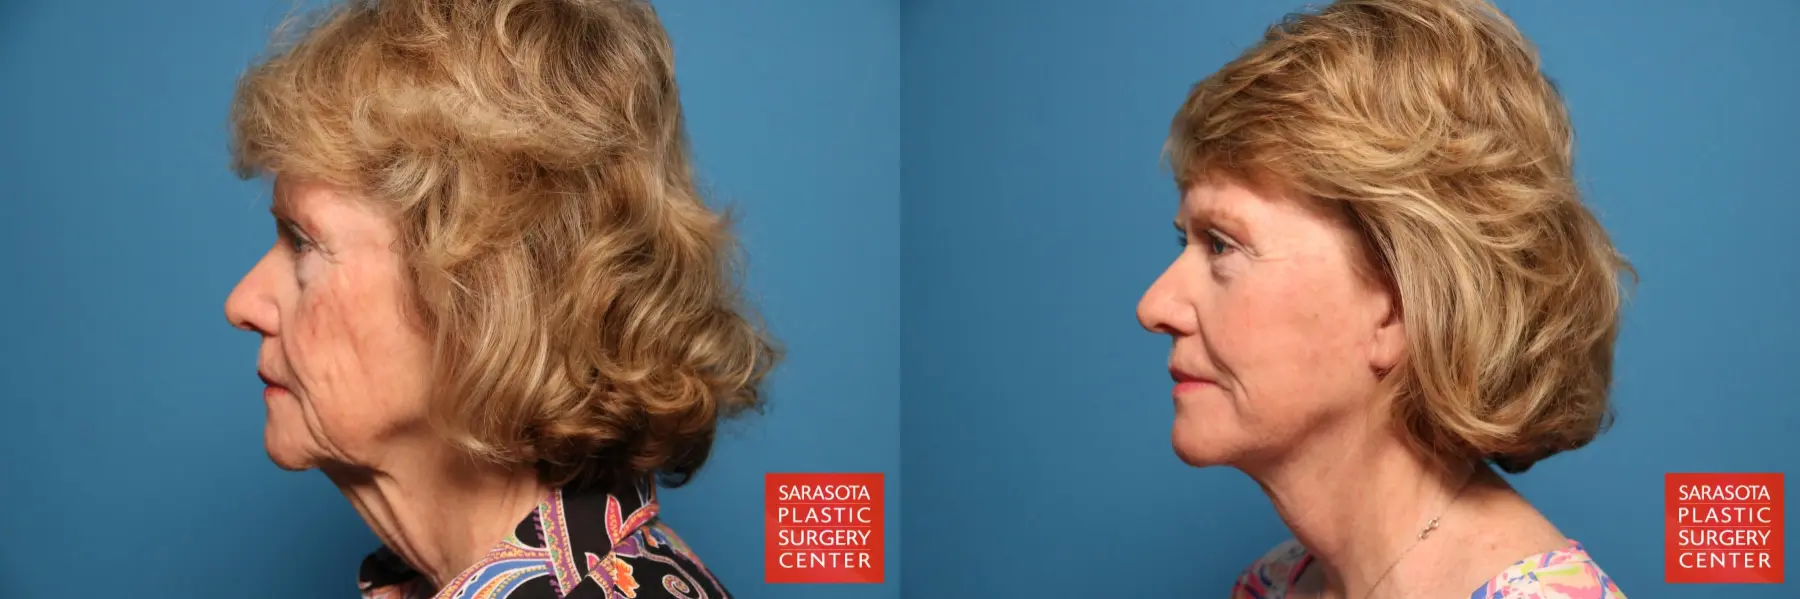 Facelift: Patient 8 - Before and After 3